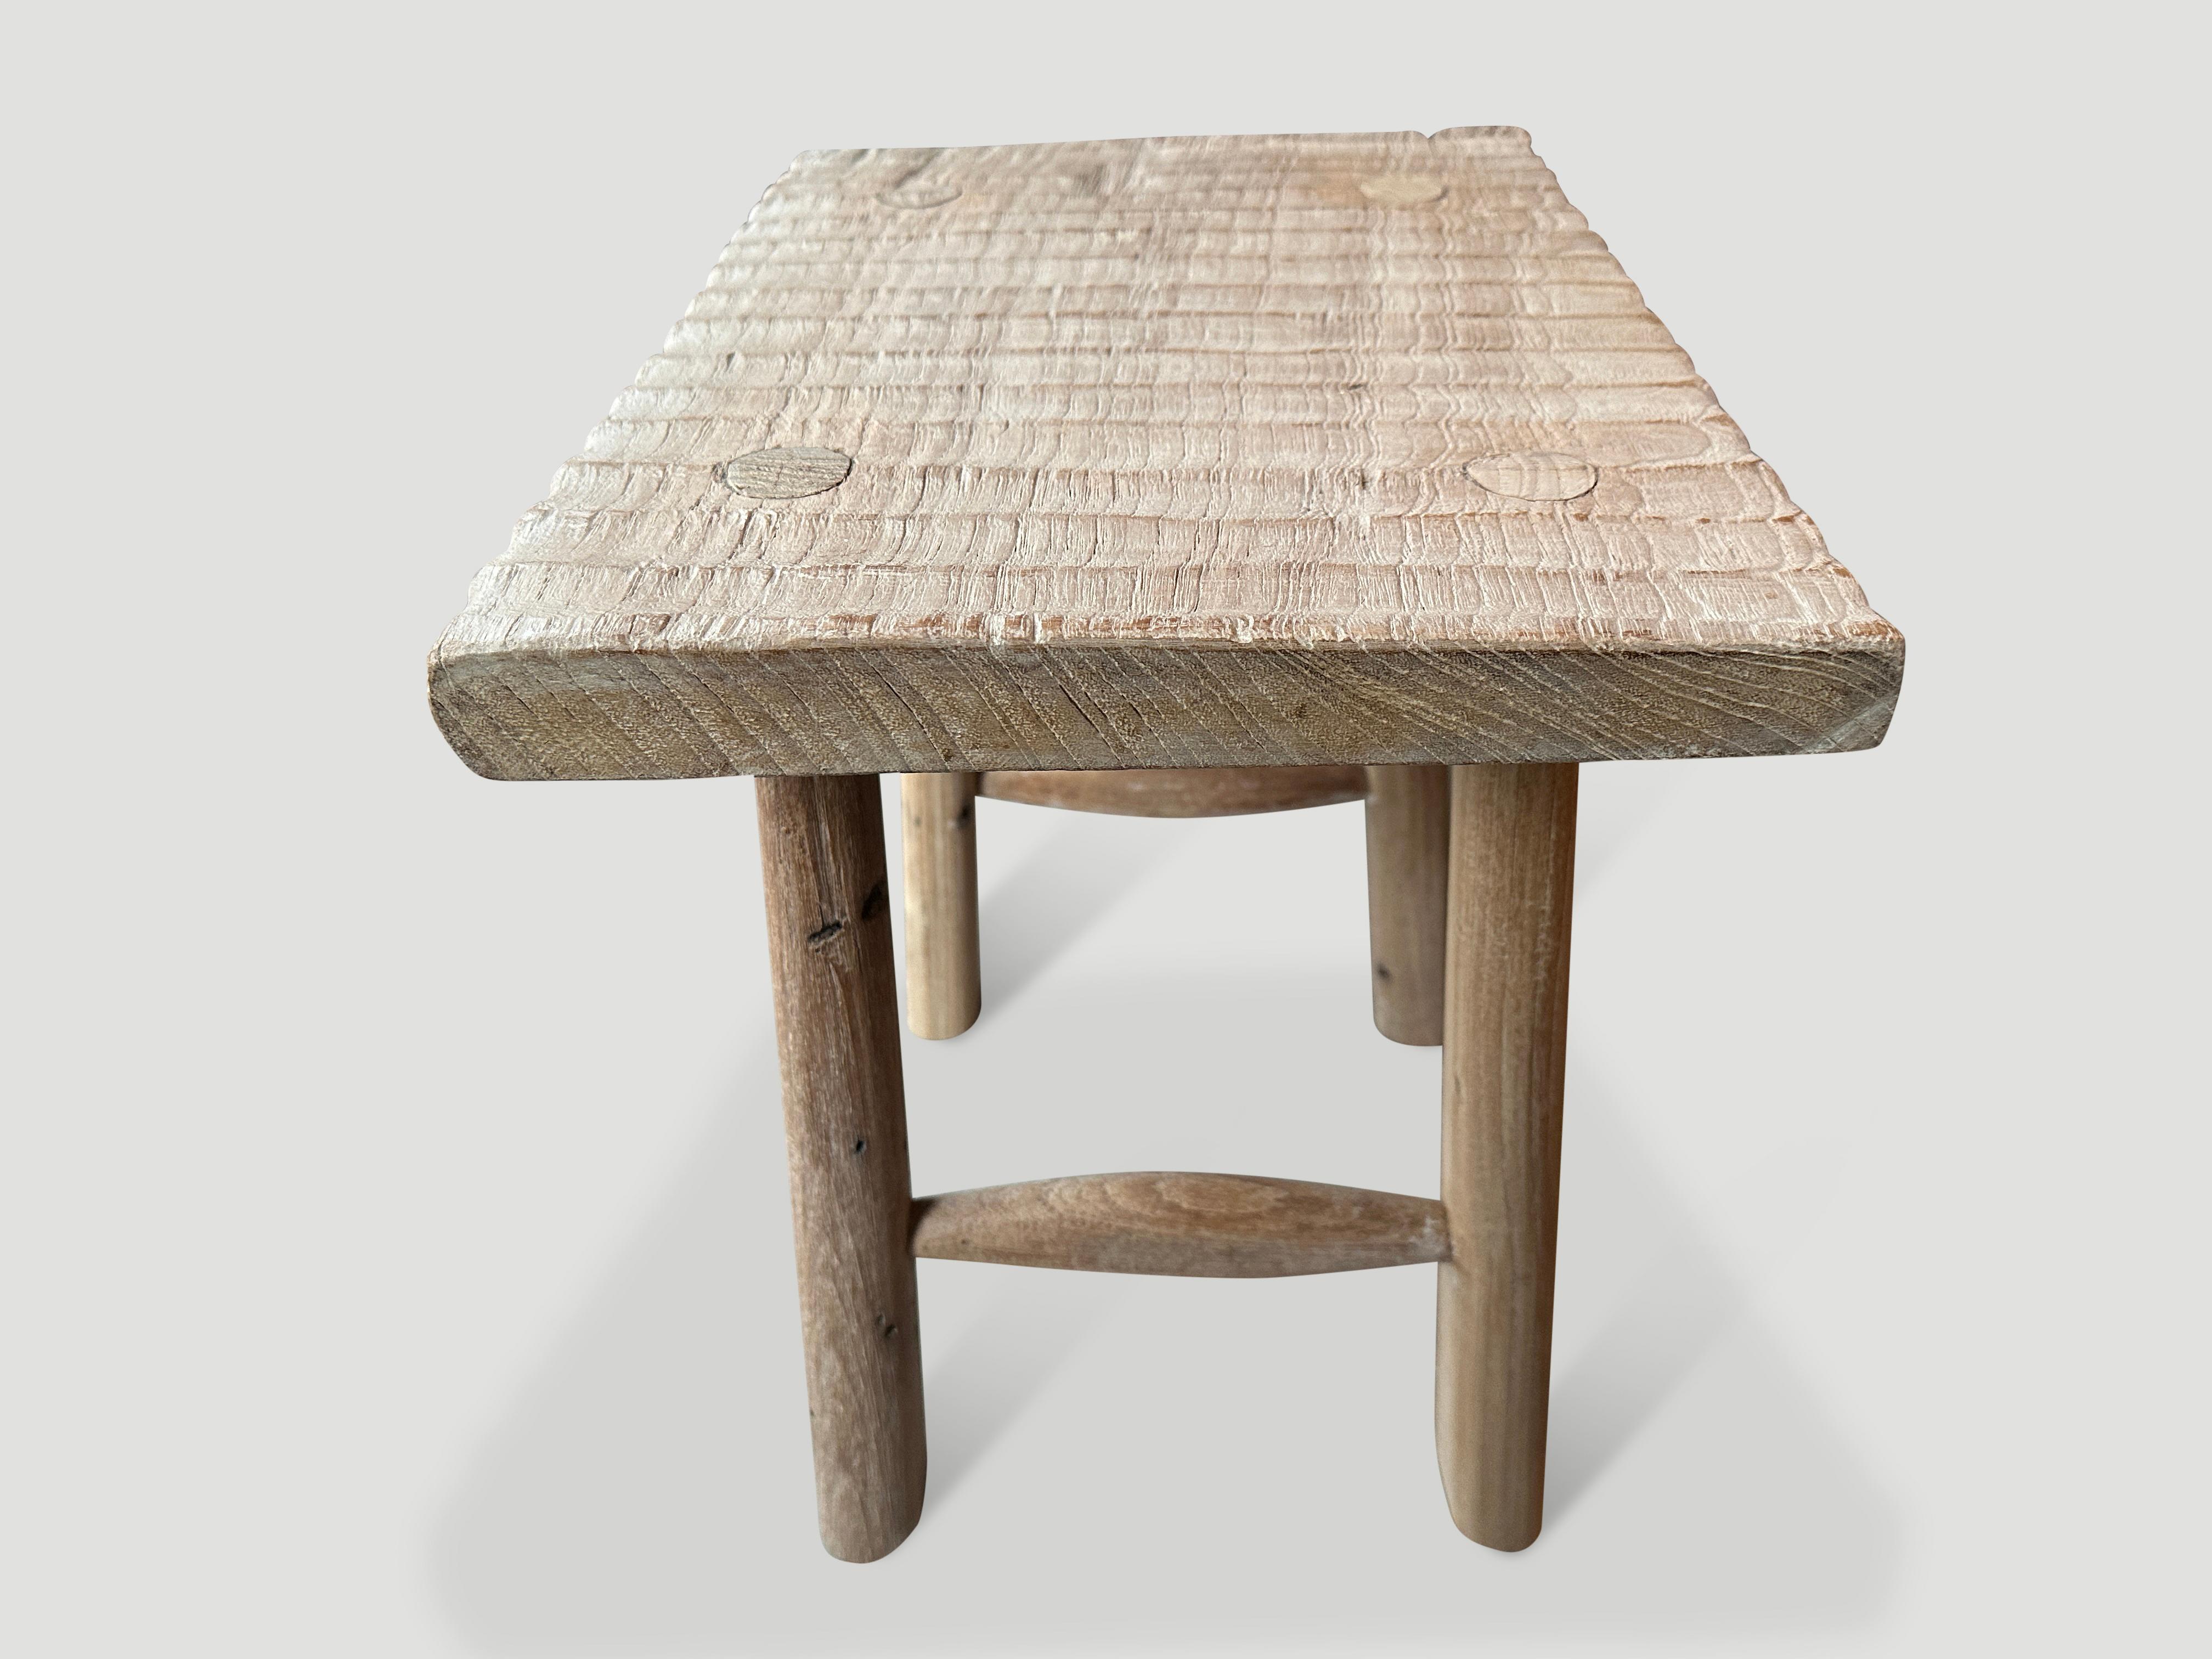 Andrianna Shamaris Bleached Teak Wood Hand Carved Stool or Side Table In Excellent Condition For Sale In New York, NY